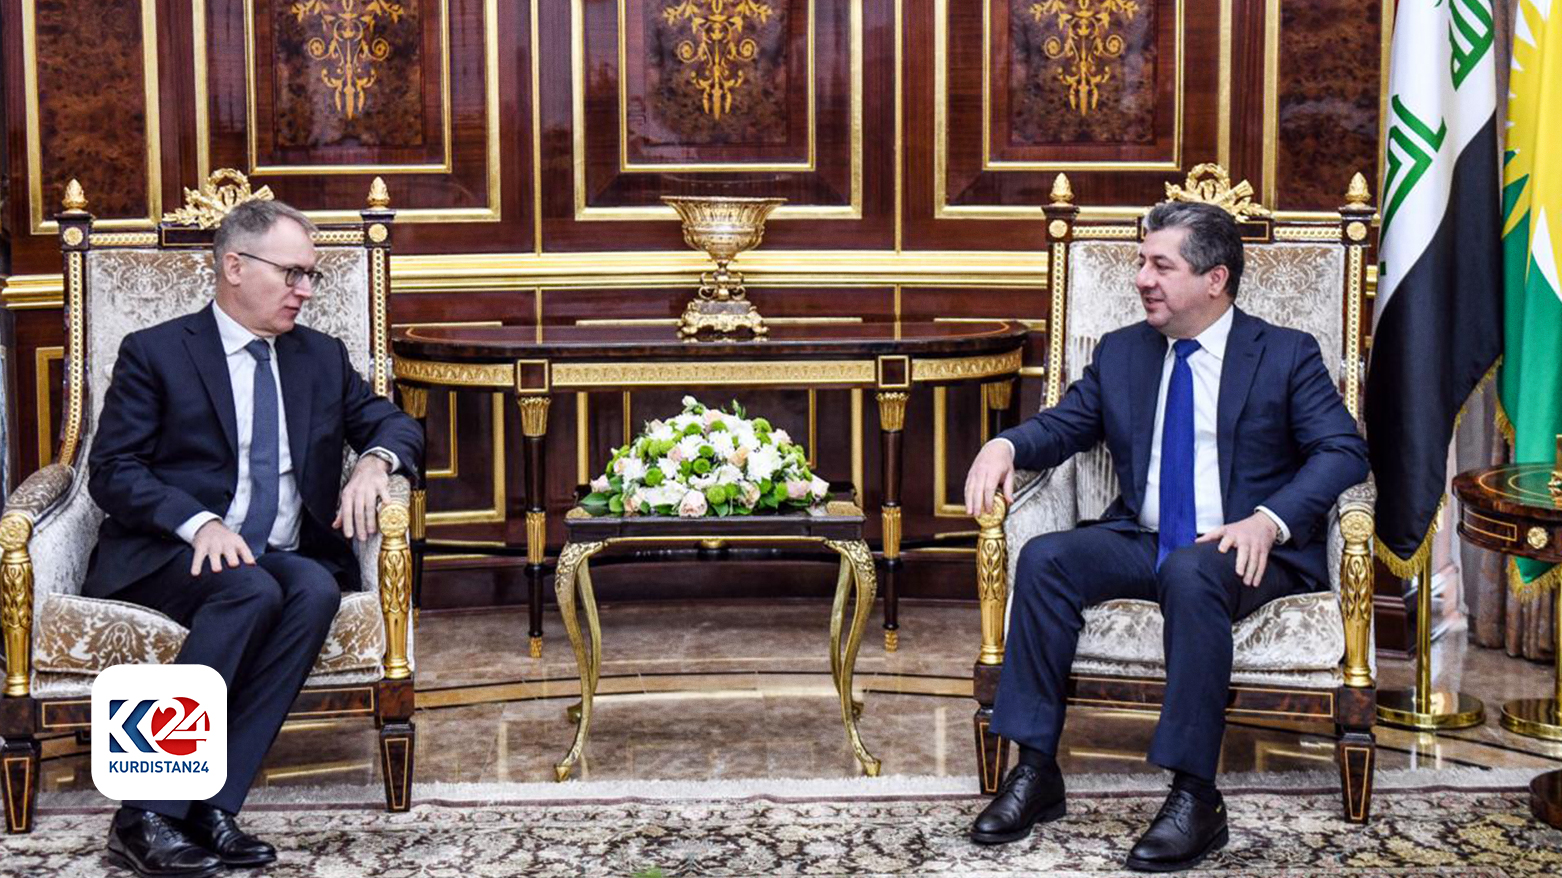 PM Barzani expresses his endorsement of conducting elections in a just manner